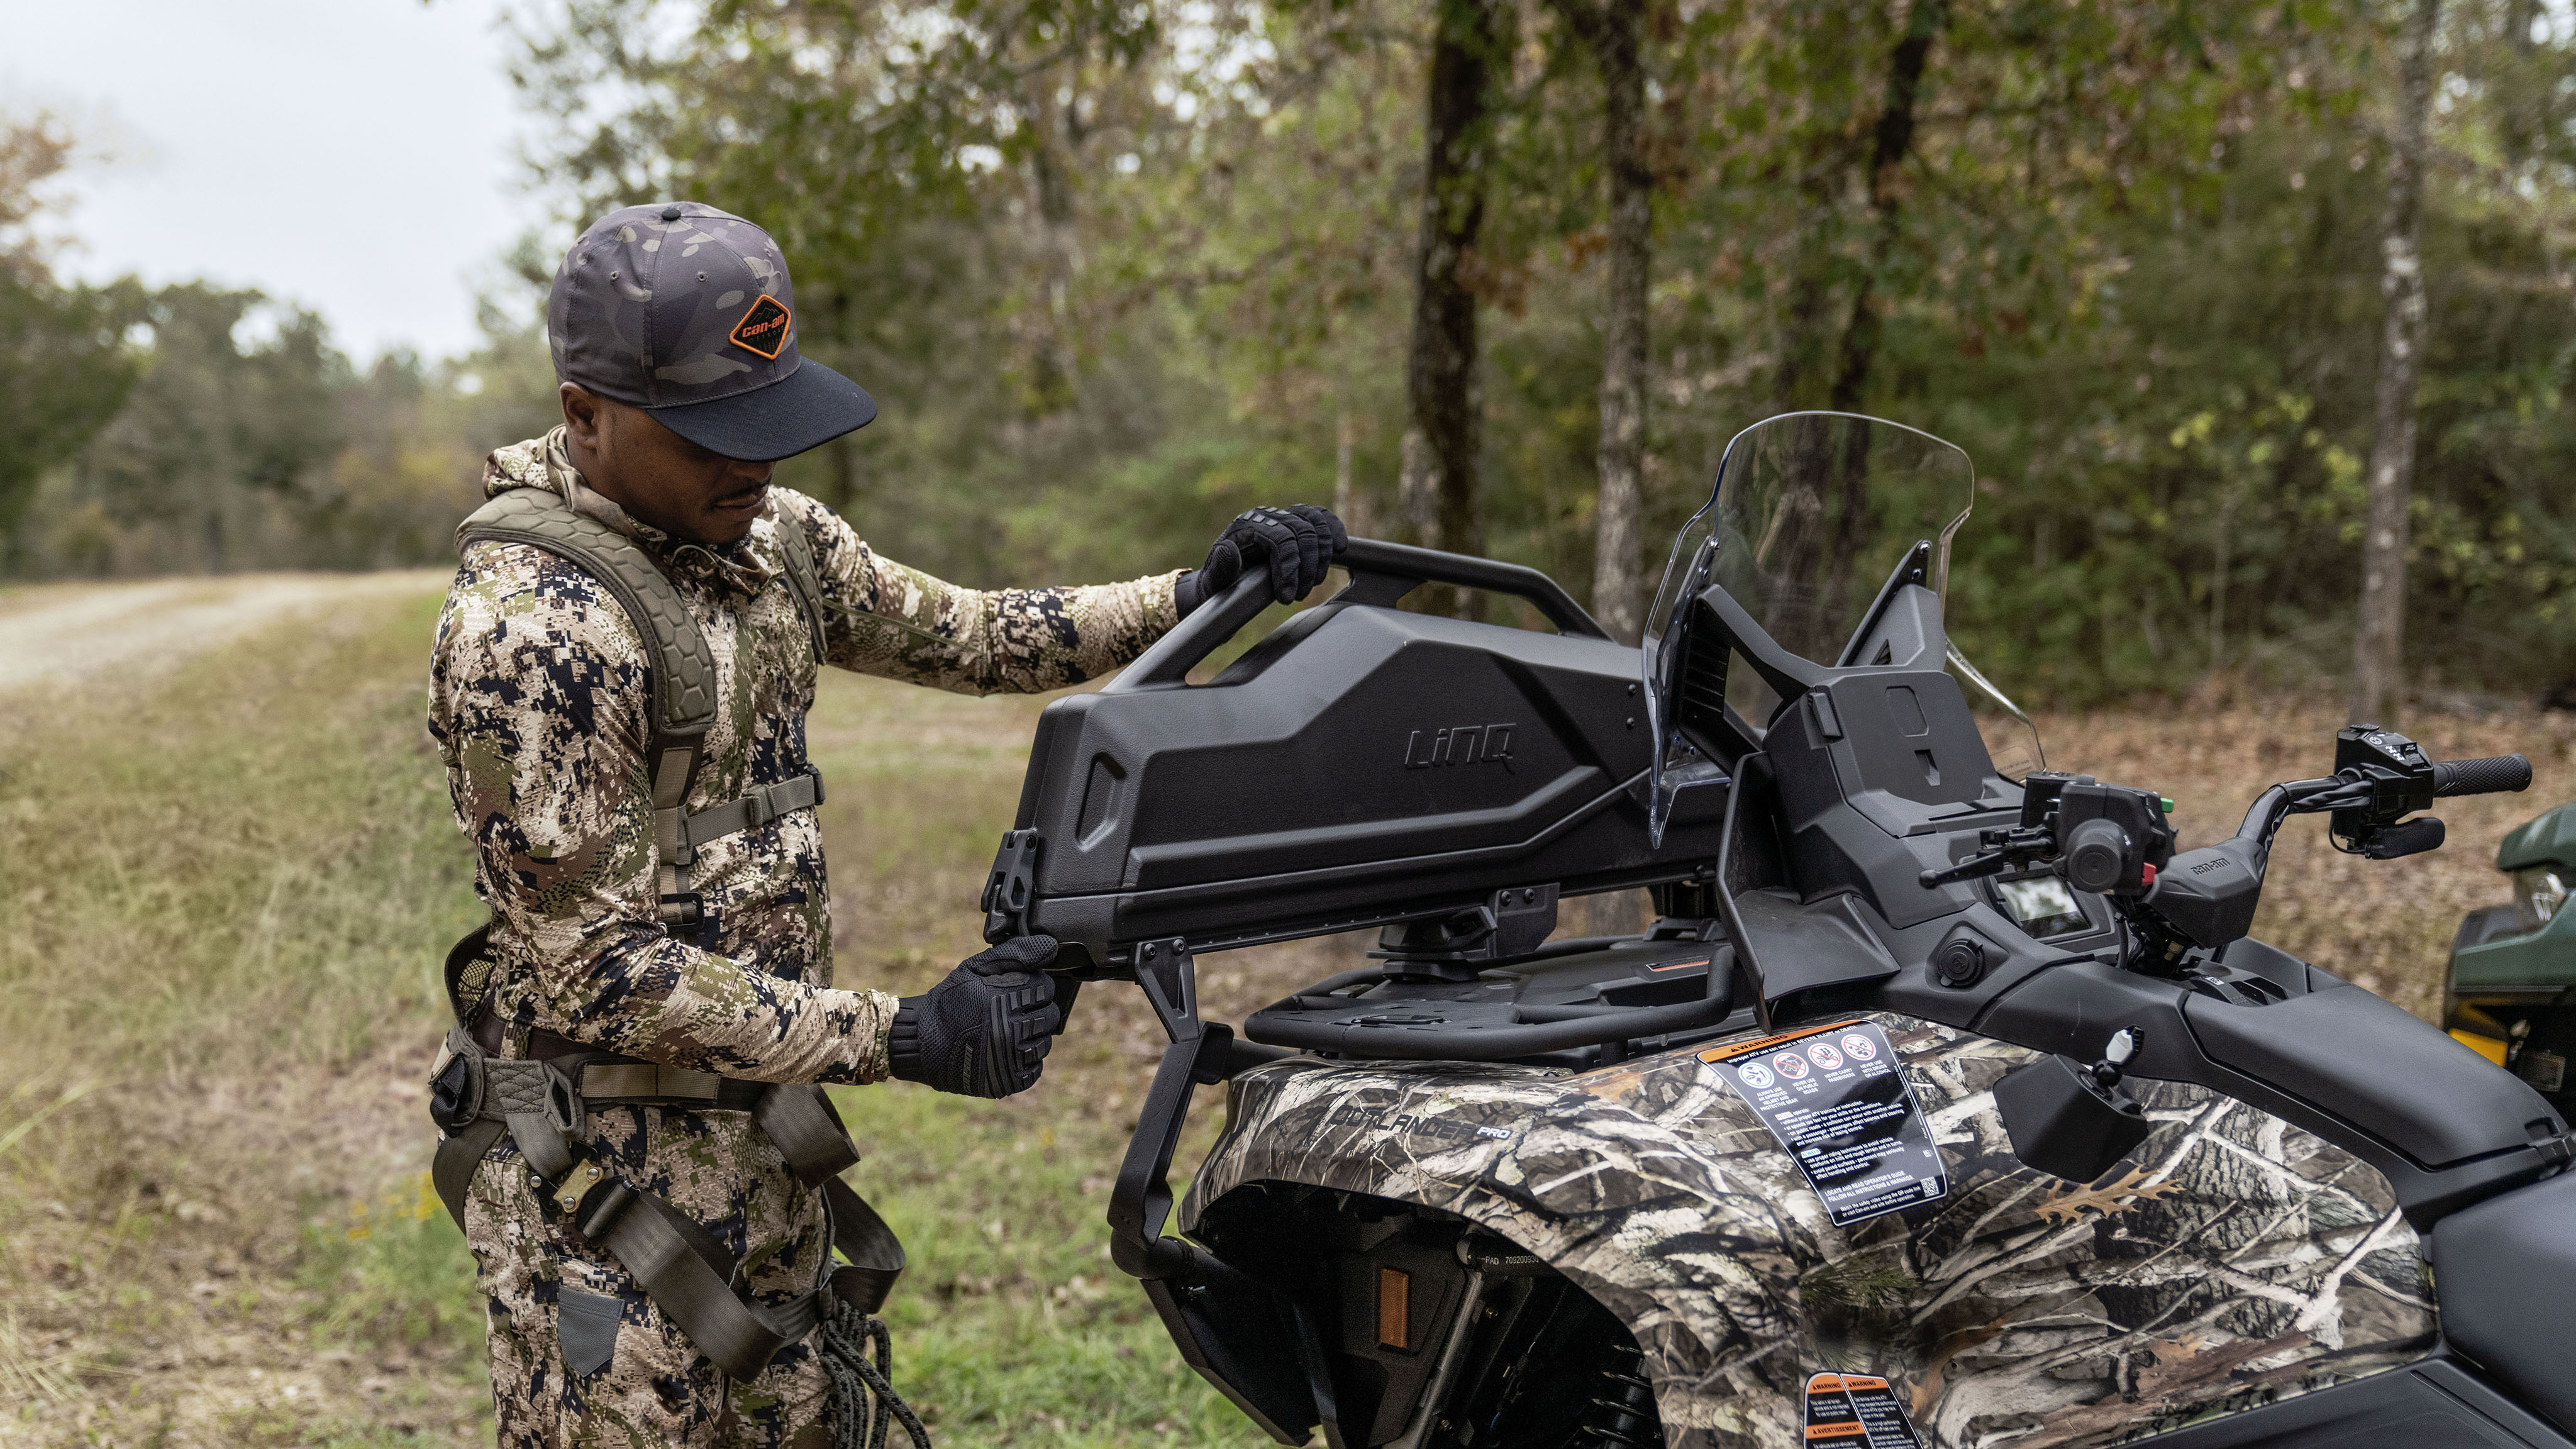 A hunter setting up a LinQ storage box on his Can-Am Outlander PRO